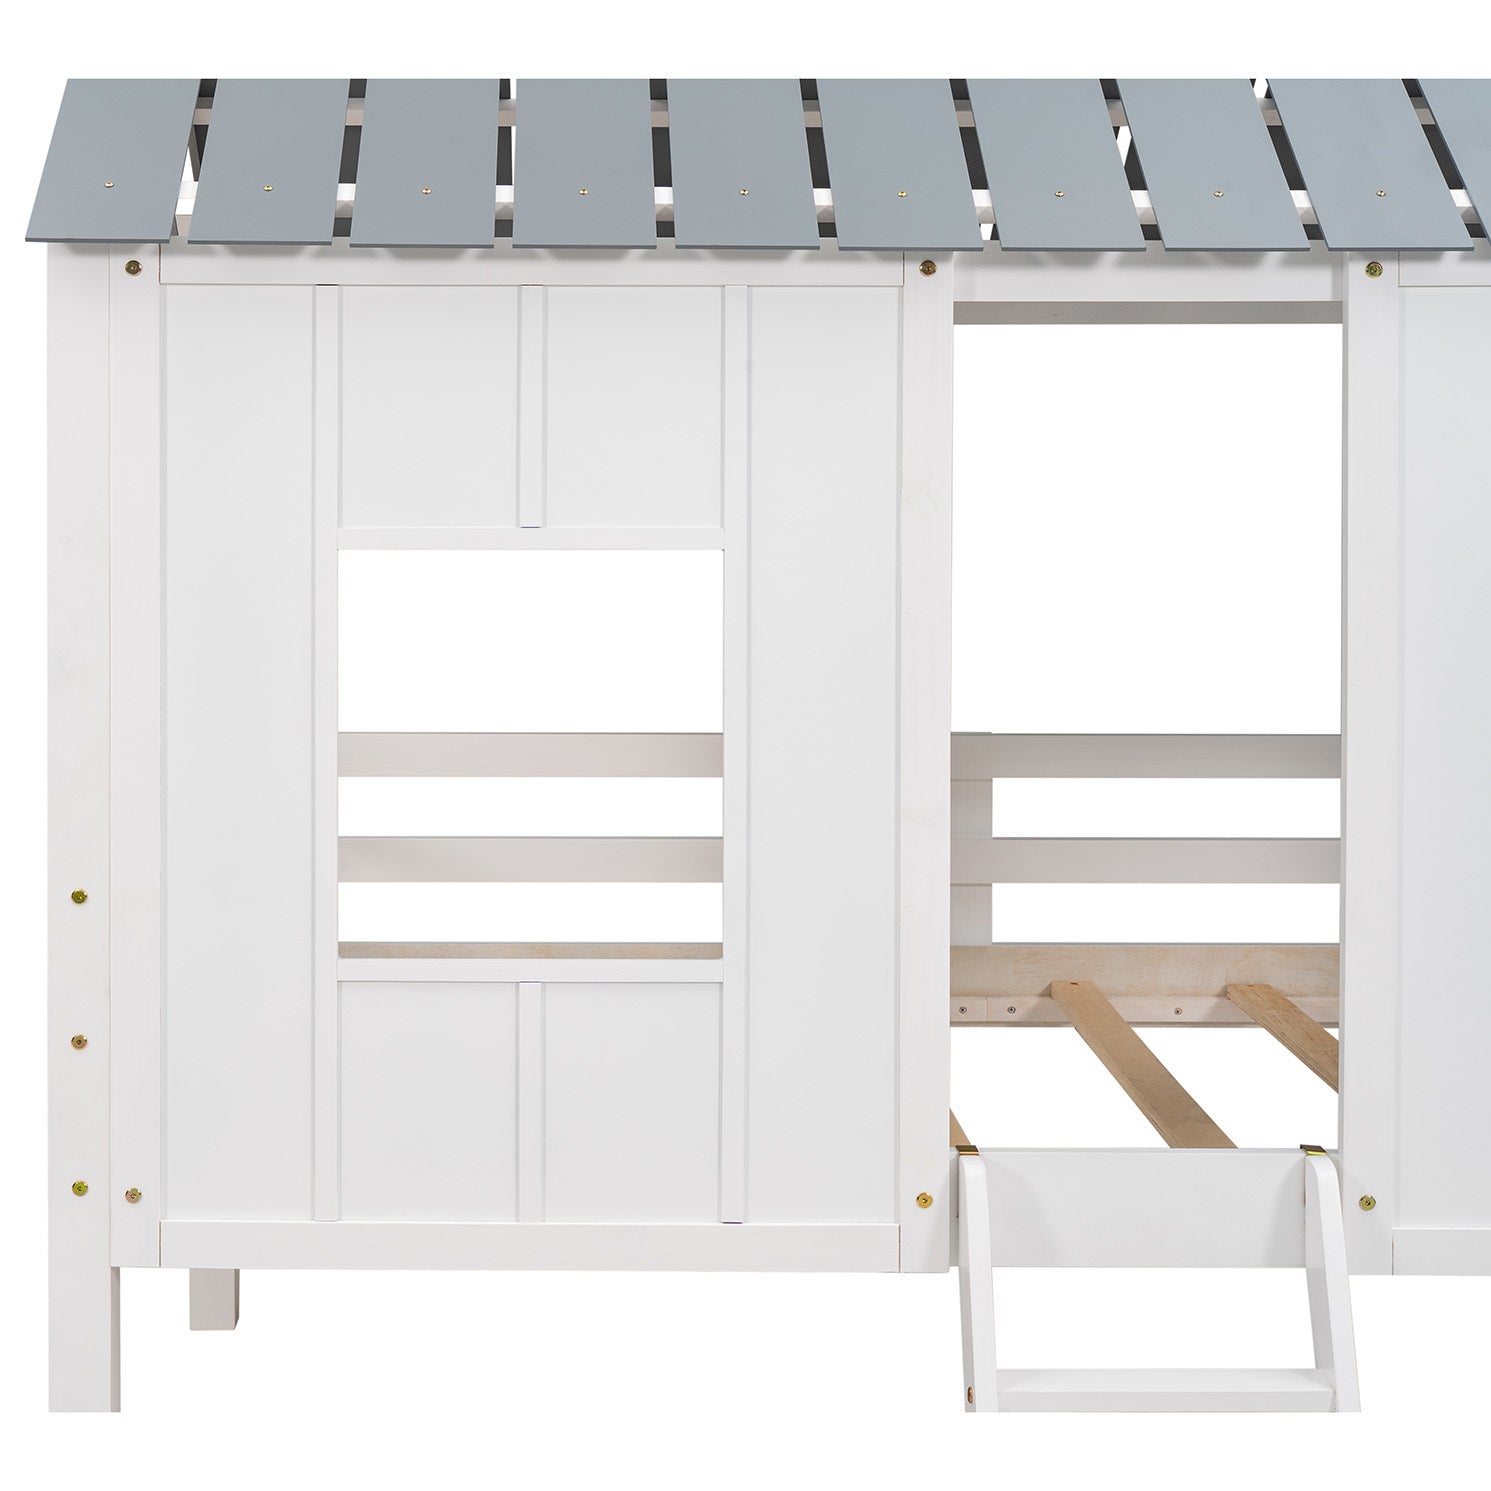 Twin Size Low Loft House Bed with Roof and Two Front Windows (White)